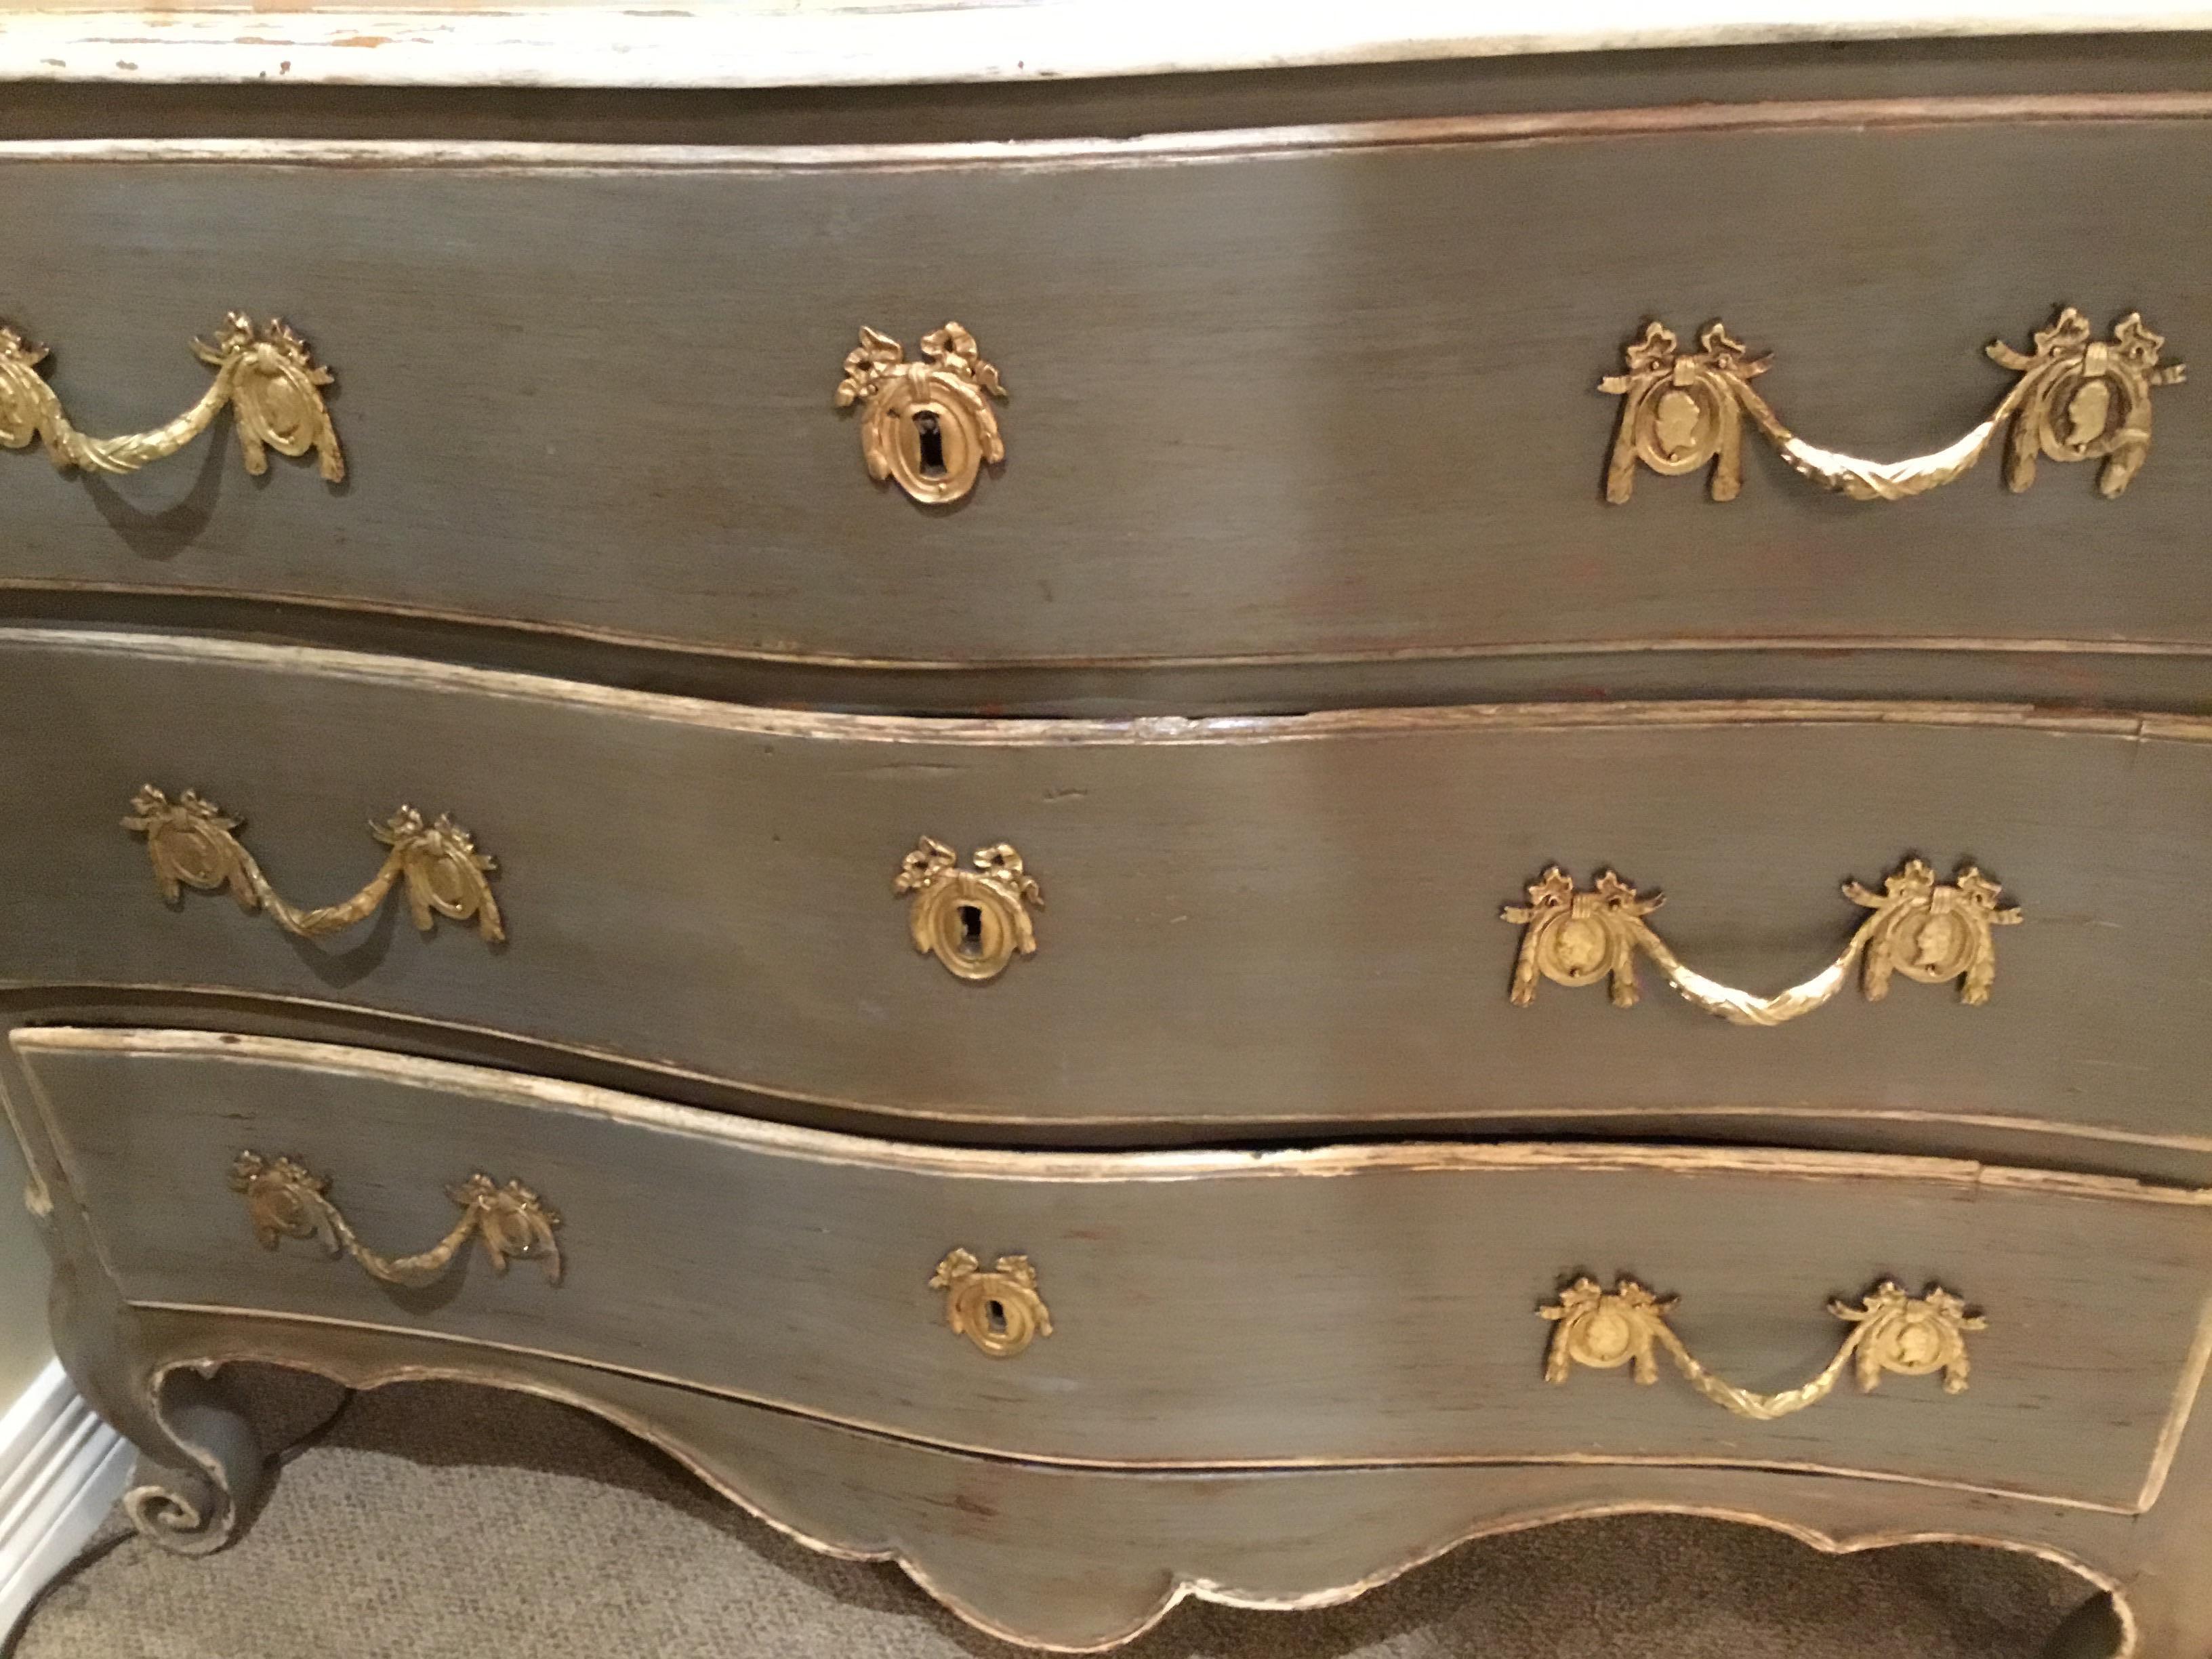 Handsome and beautiful chest that is polychromed in French gray-green hue. Faux
Painted in artful distressed manner. Louis XV style, the three drawers are raised on
Cabriole curled feet. Highlights in pale cream along the top edge and the